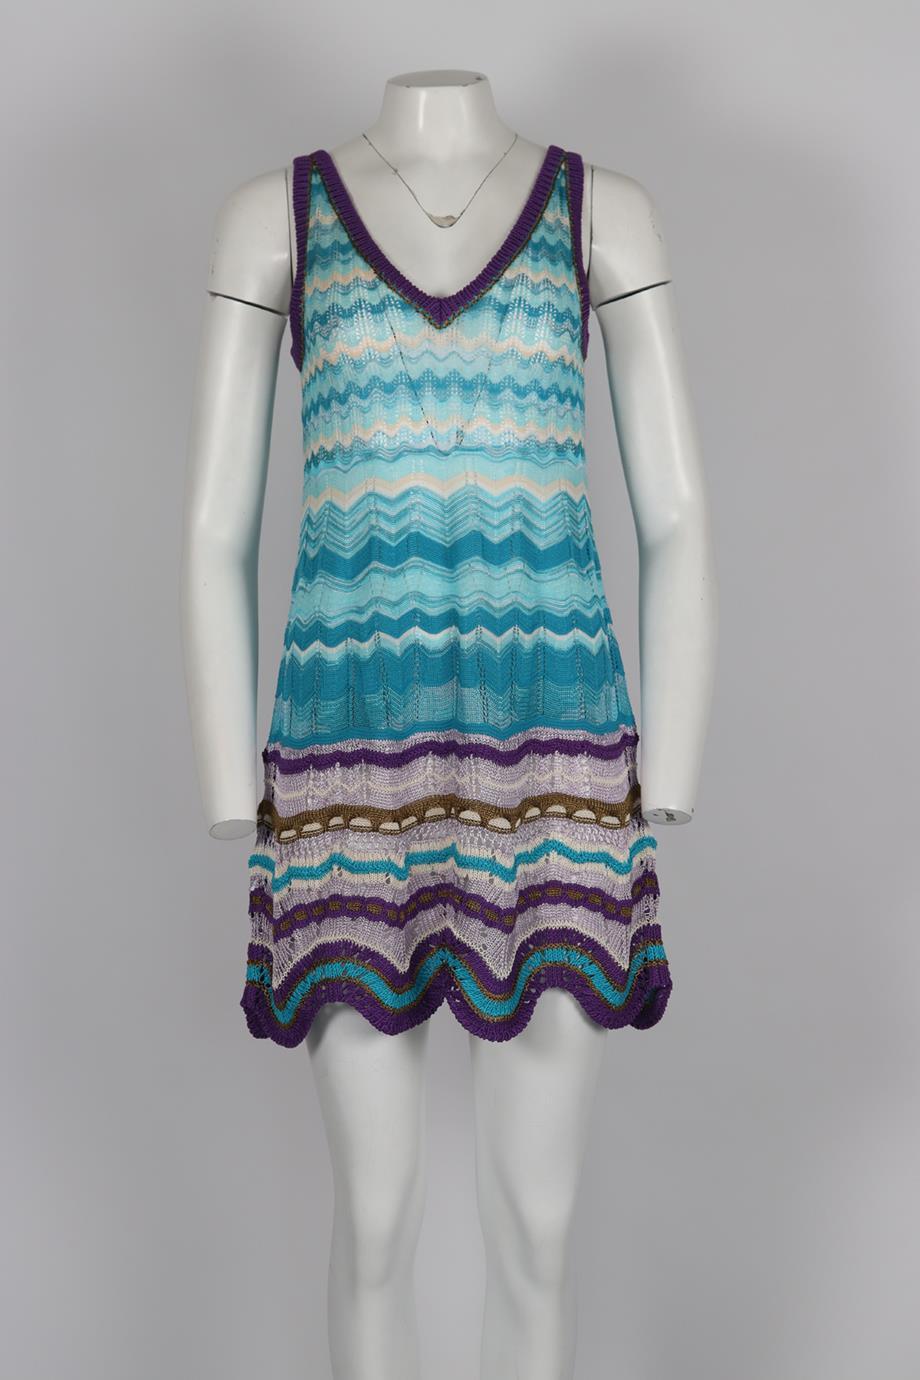 Missoni Crochet Knit Mini Dress. Purple, blue and white. Sleeveless. V-Neck. Slips on. 45% Cotton, 27% viscose, 16% linen, 10% silk, 2% nylon. IT 40 (UK 8, US 4, FR 36). Bust: 33.1 in. Waist: 32.6 in. Hips: 37.2 in. Length: 28 in. Condition: Used.